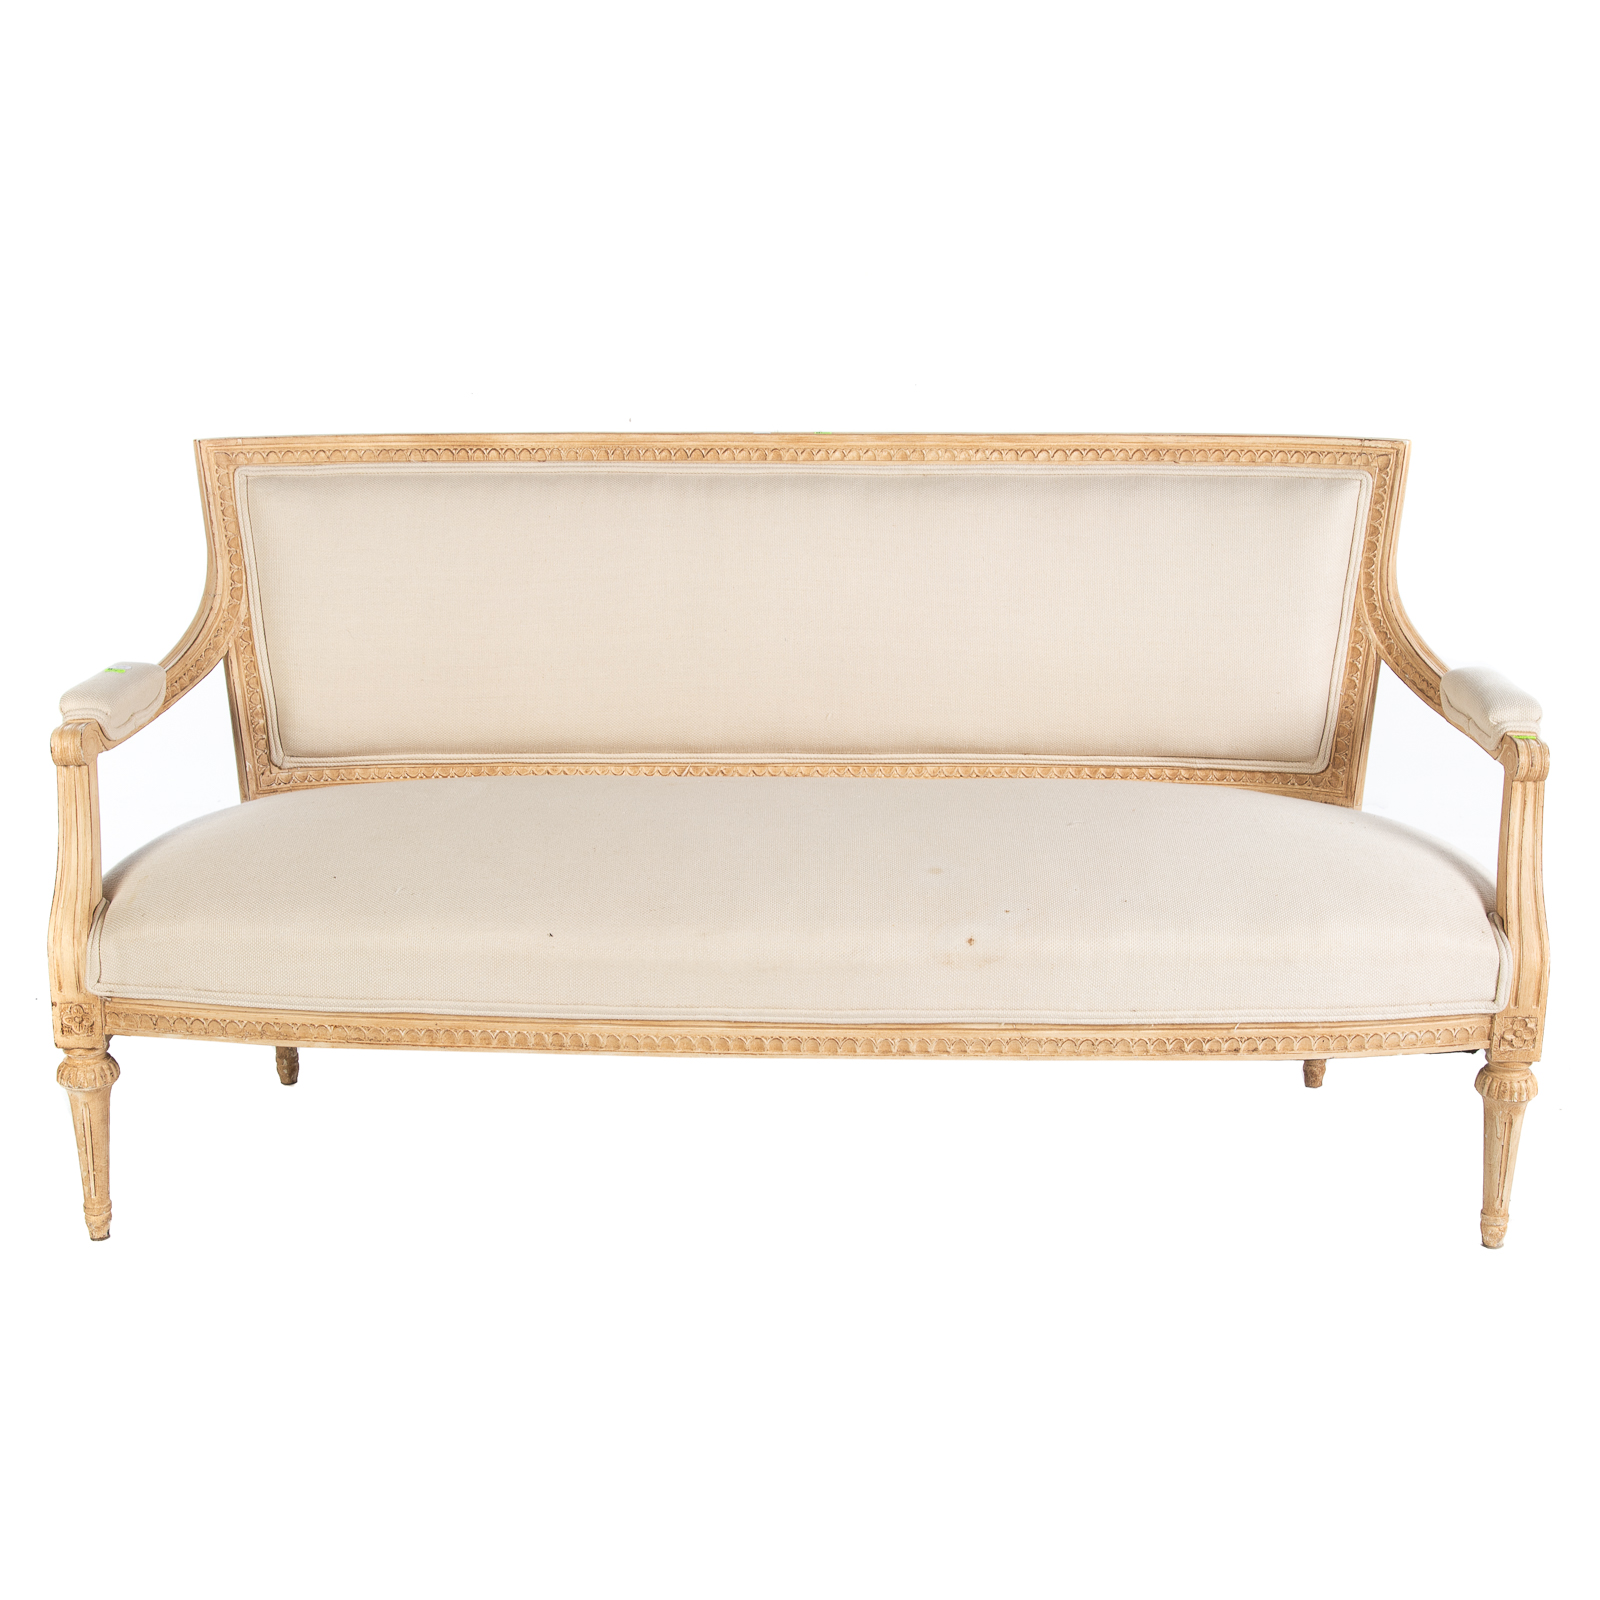 LOUIS XVI STYLE UPHOLSTERED SETTEE